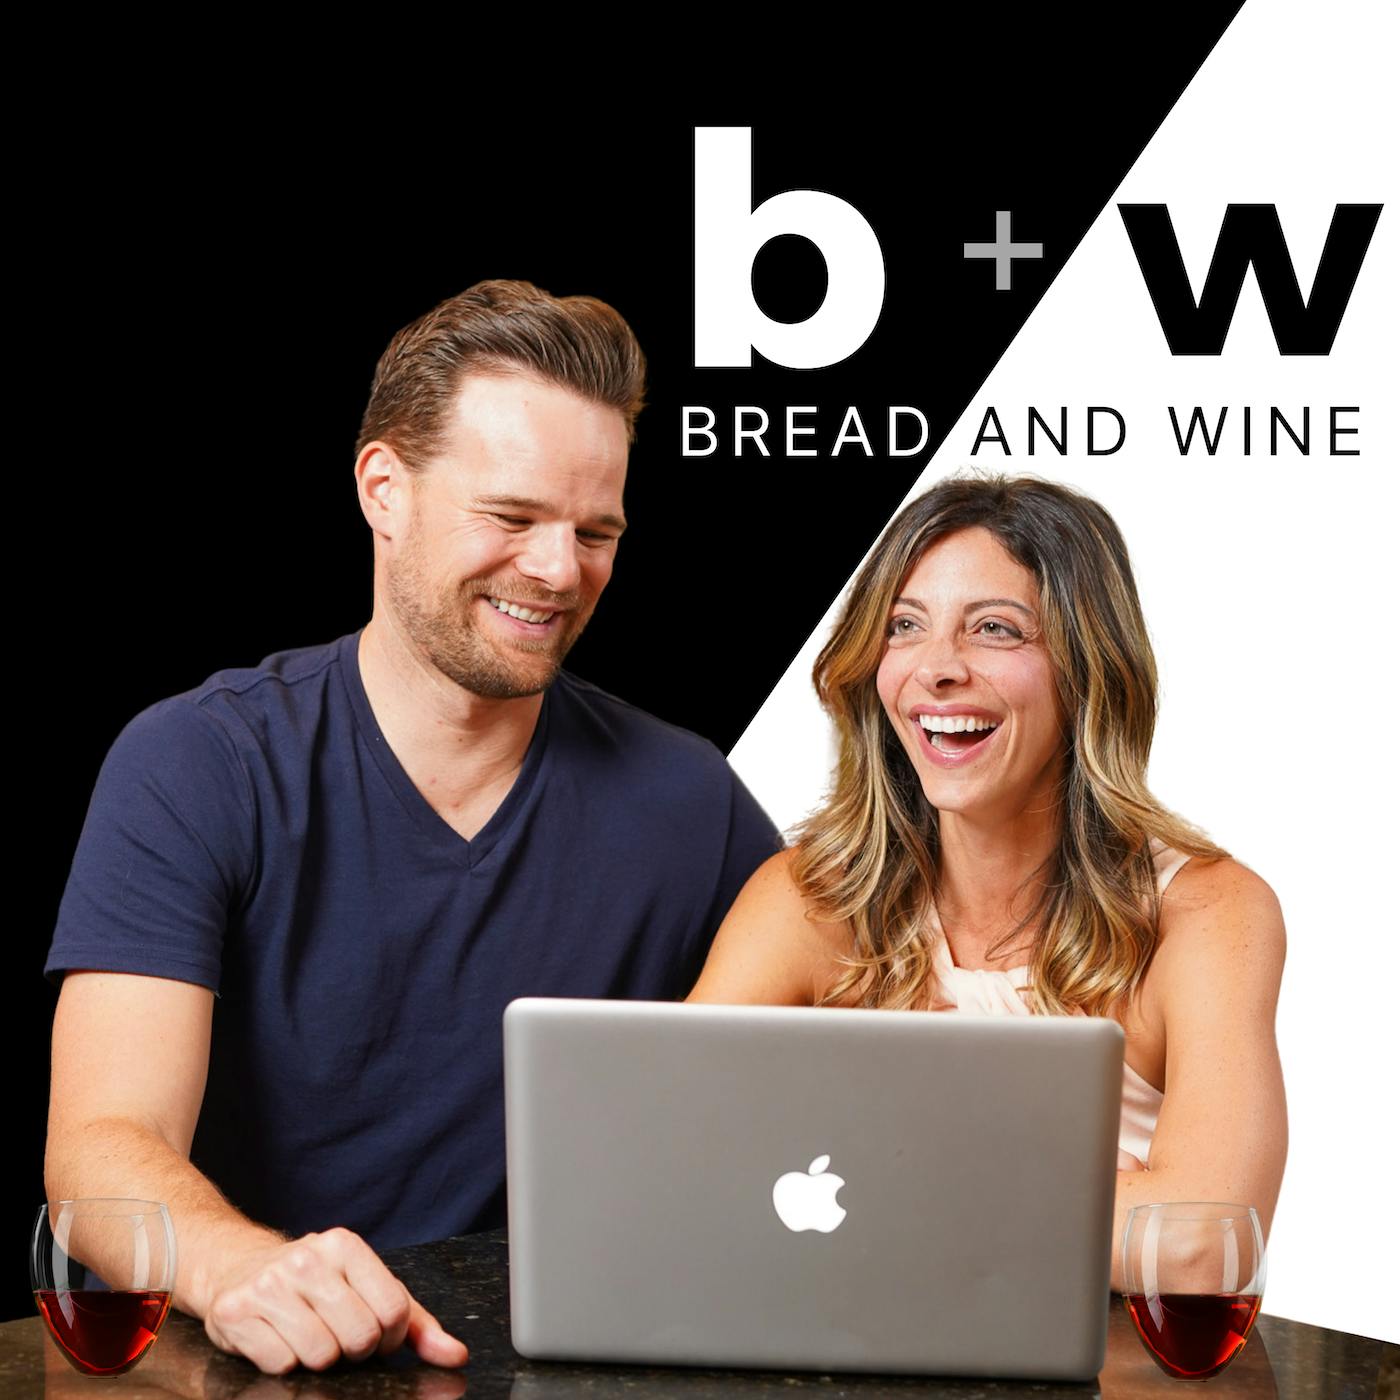 I Only Want to Work Part-Time. Is it Possible? (Bread & Wine)